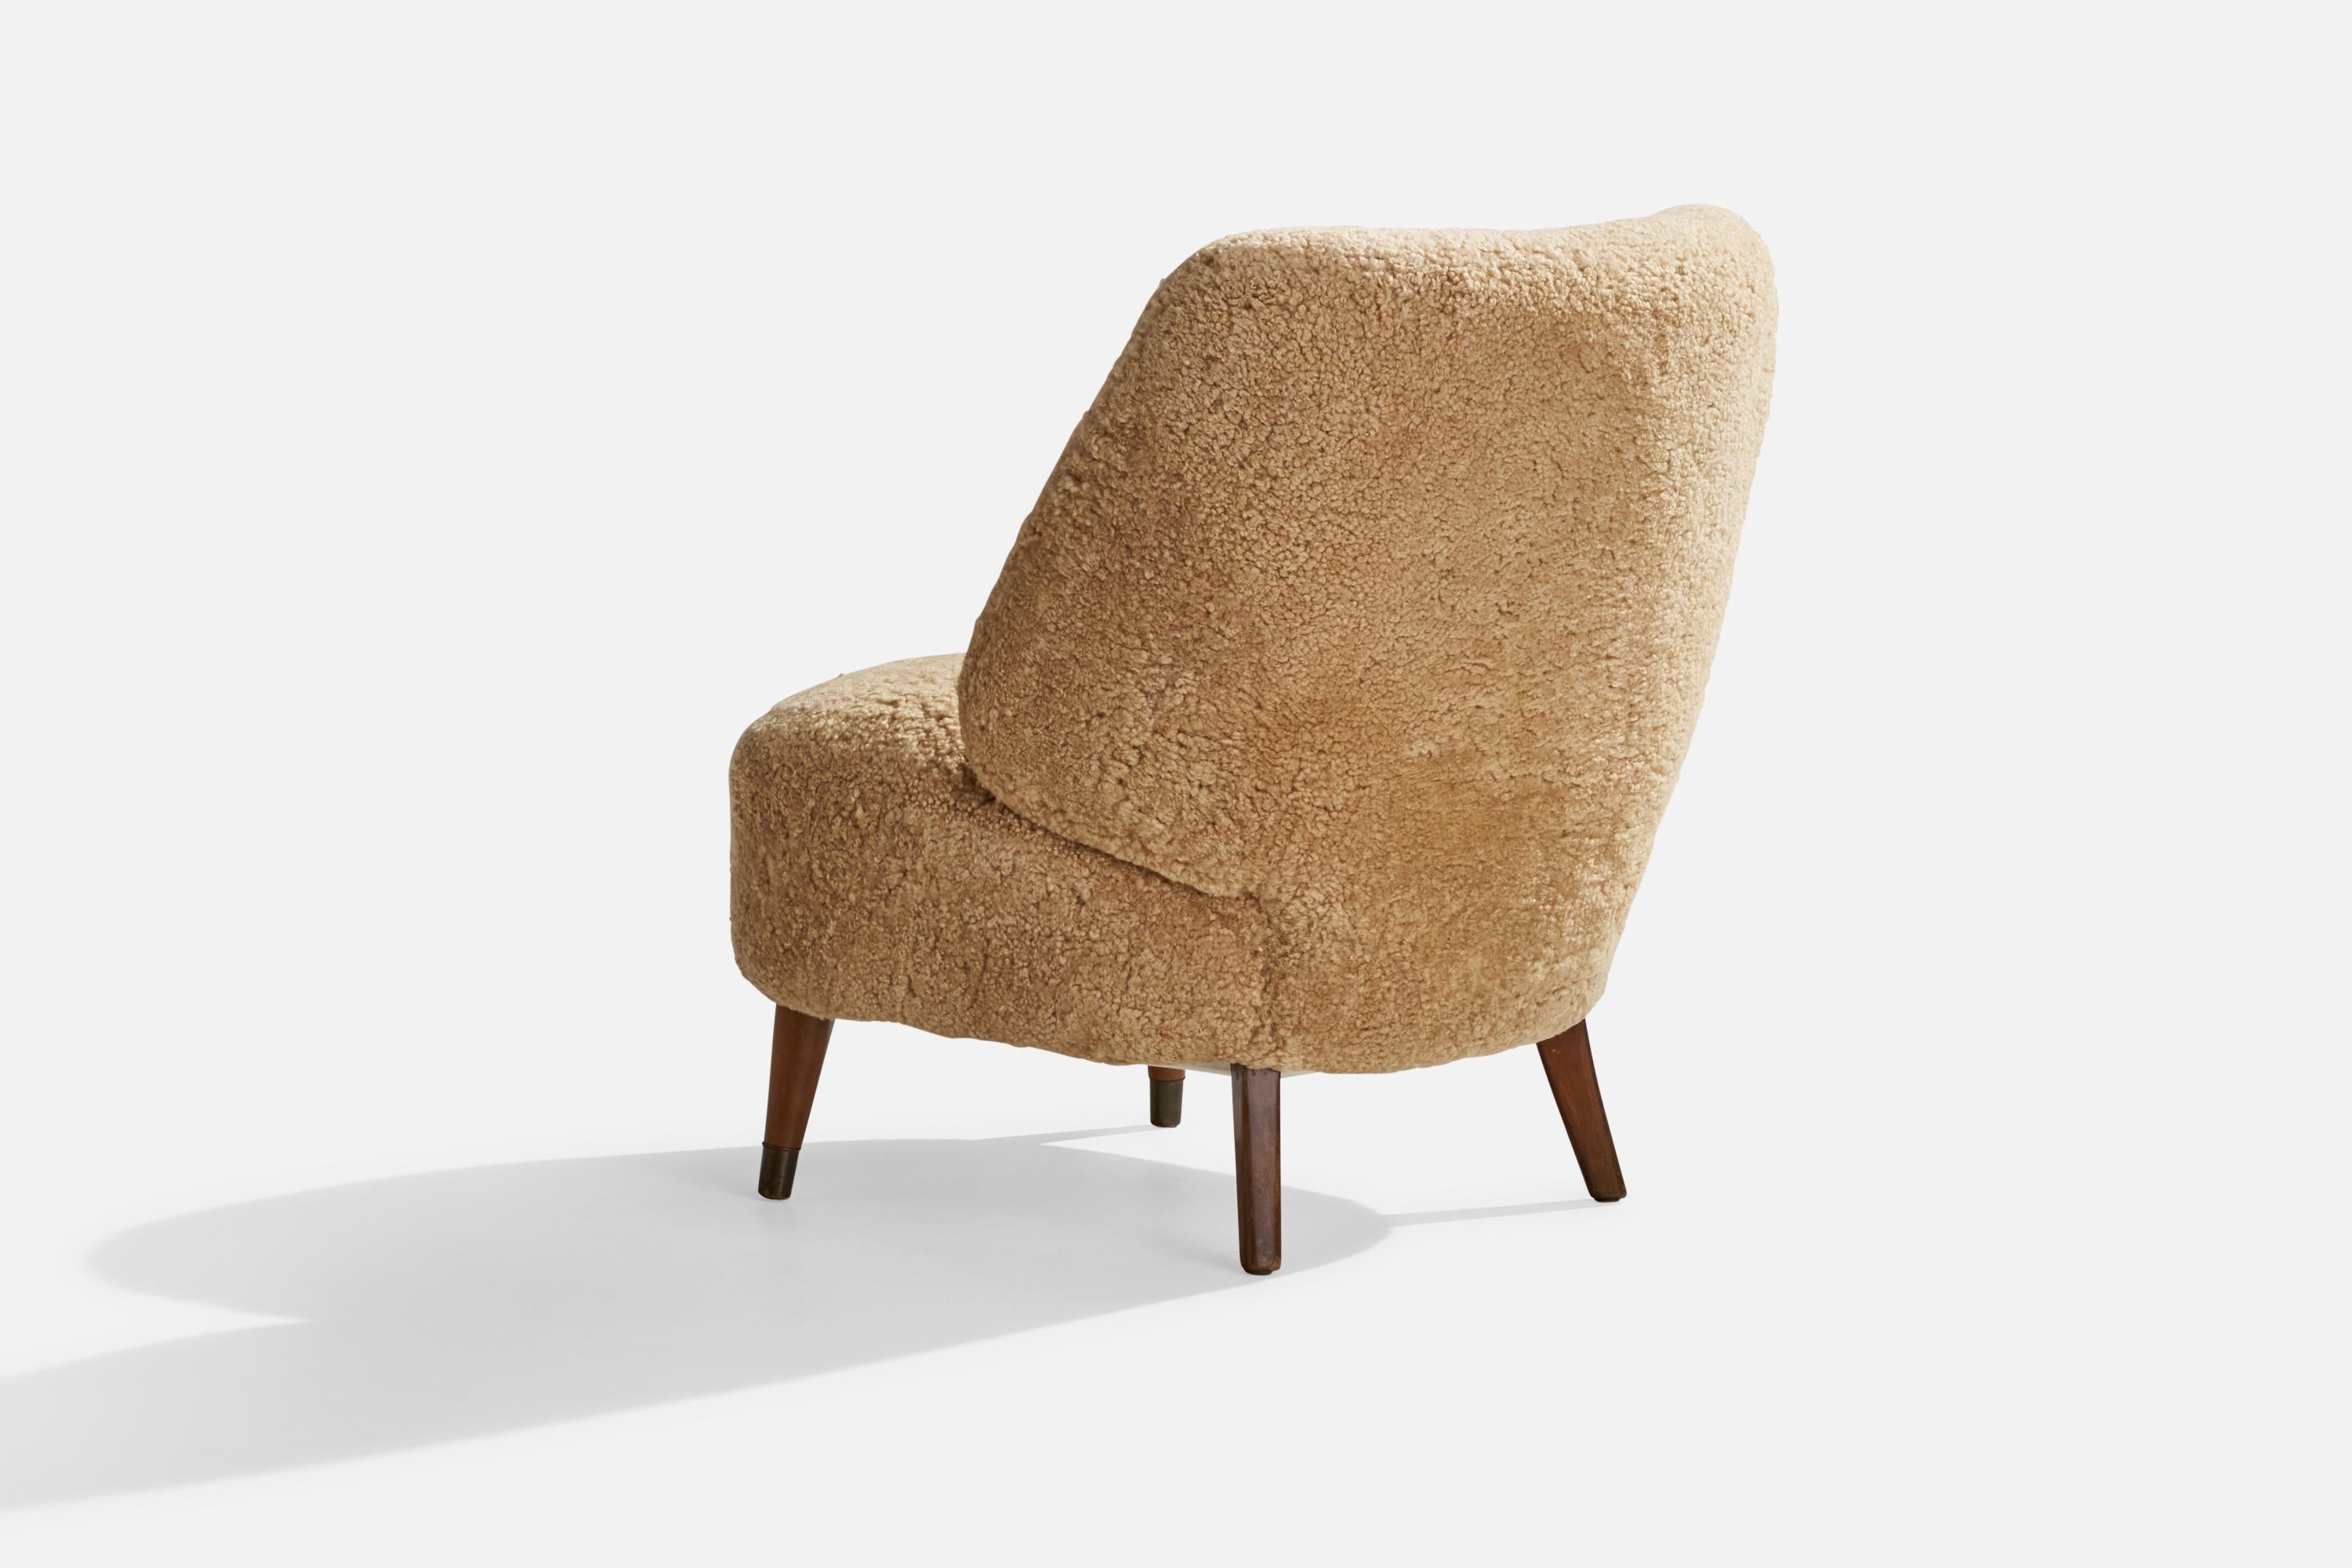 Sheepskin Sven Staaf, Lounge Chair, Shearling, Wood, Sweden, 1940s For Sale